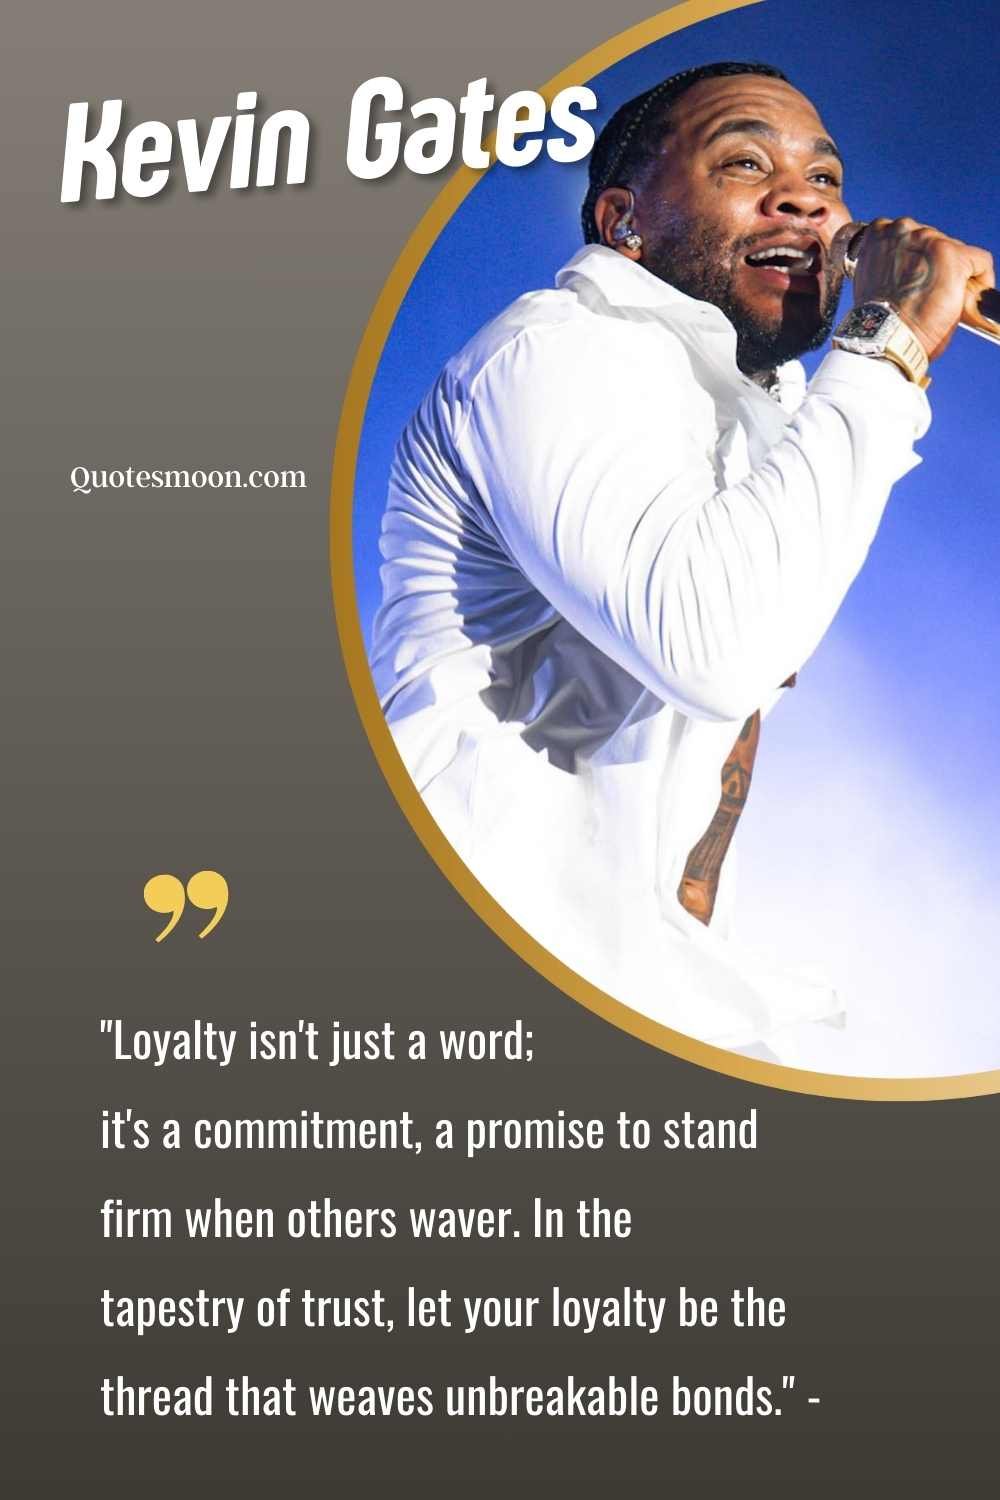 Inspirational Kevin Gates Quotes On Success with images